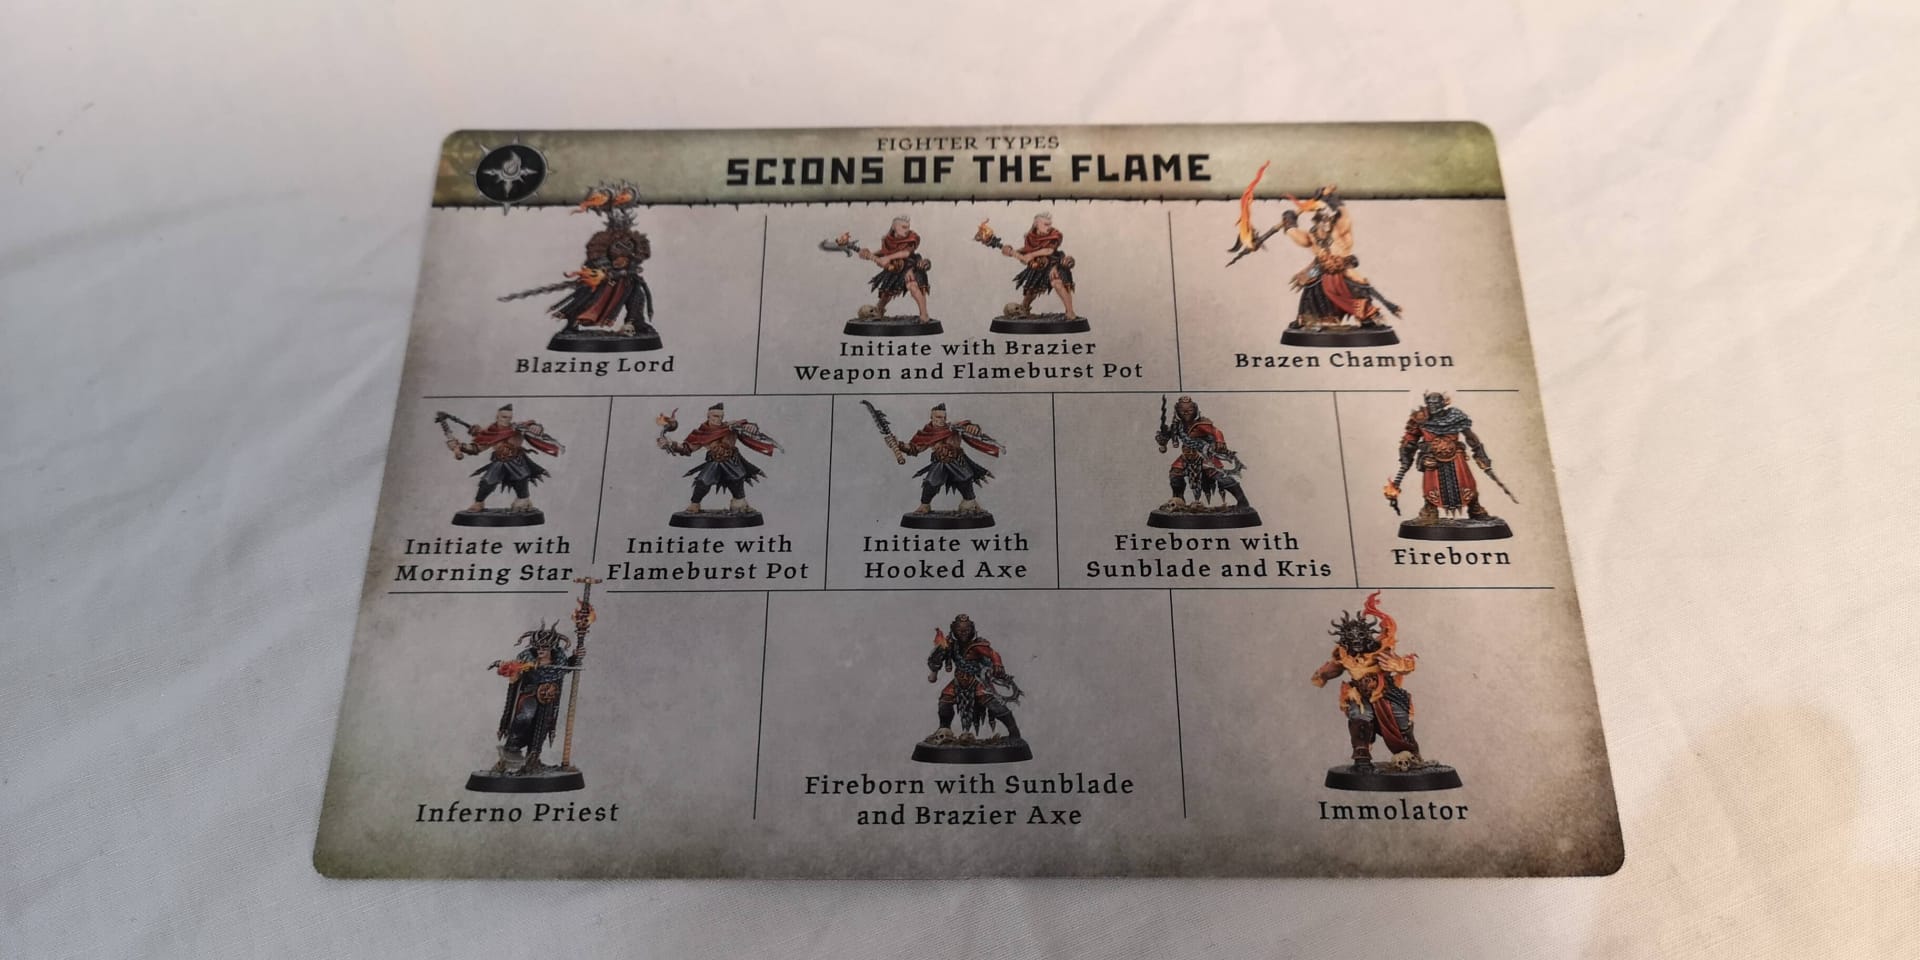 Brazen Champion Scions of the Flame Warcry Catacombs Warhammer 